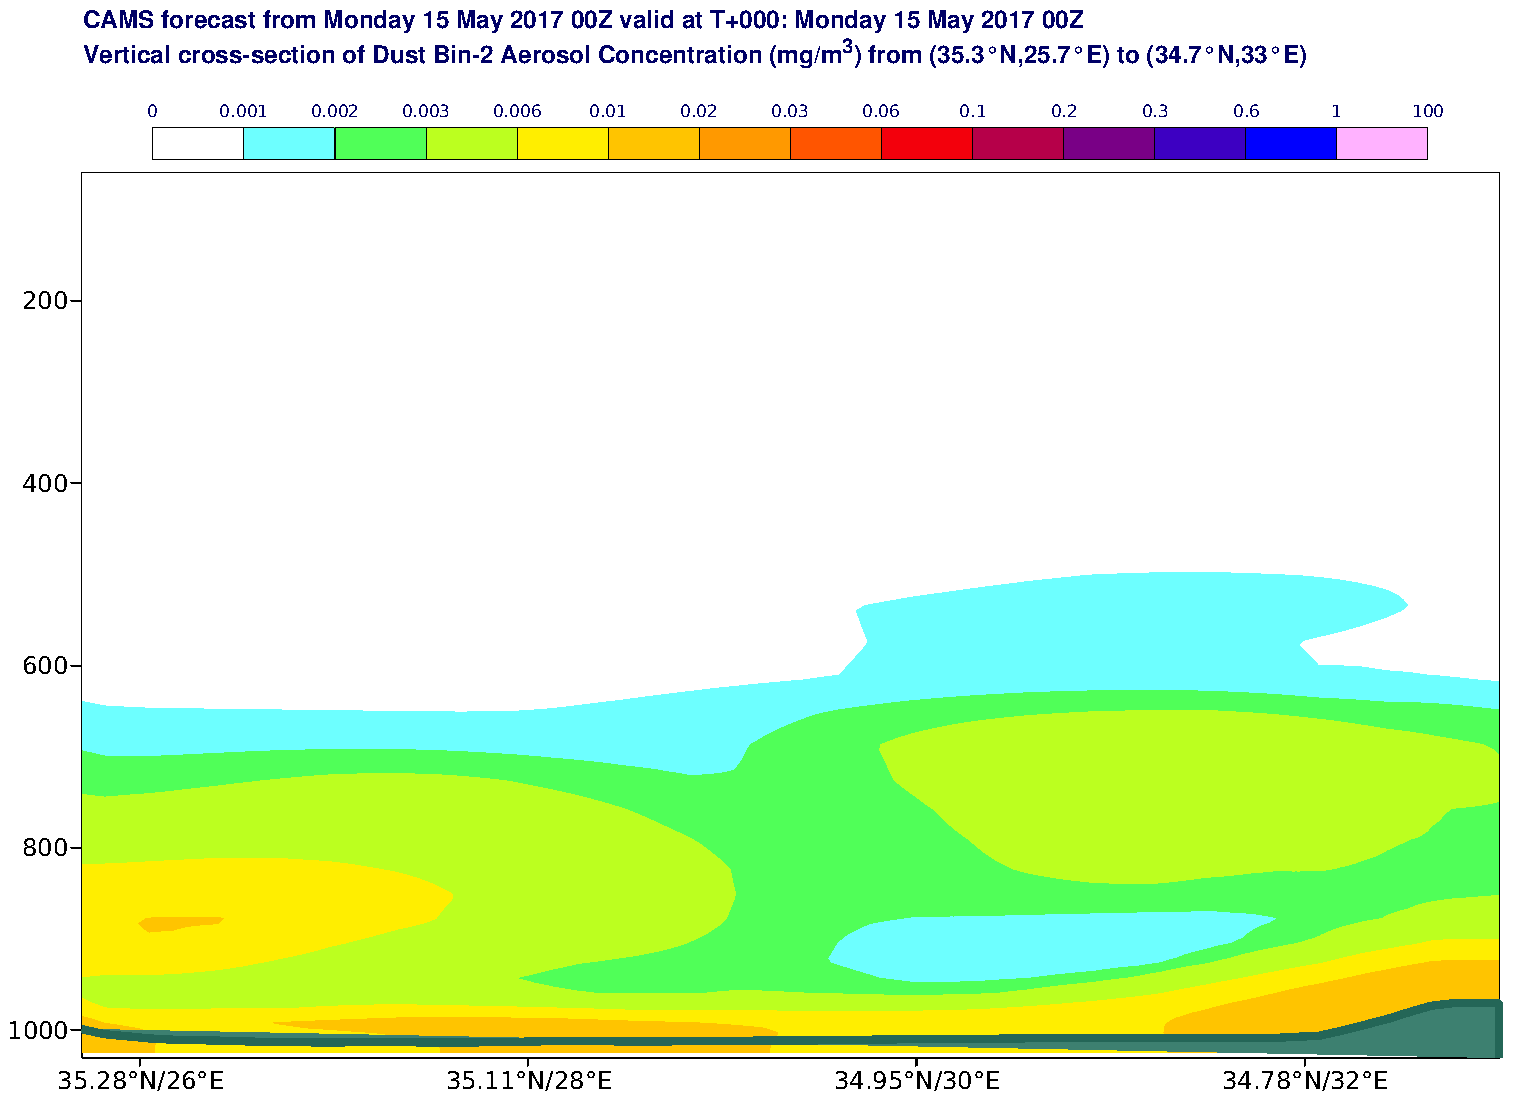 Vertical cross-section of Dust Bin-2 Aerosol Concentration (mg/m3) valid at T0 - 2017-05-15 00:00